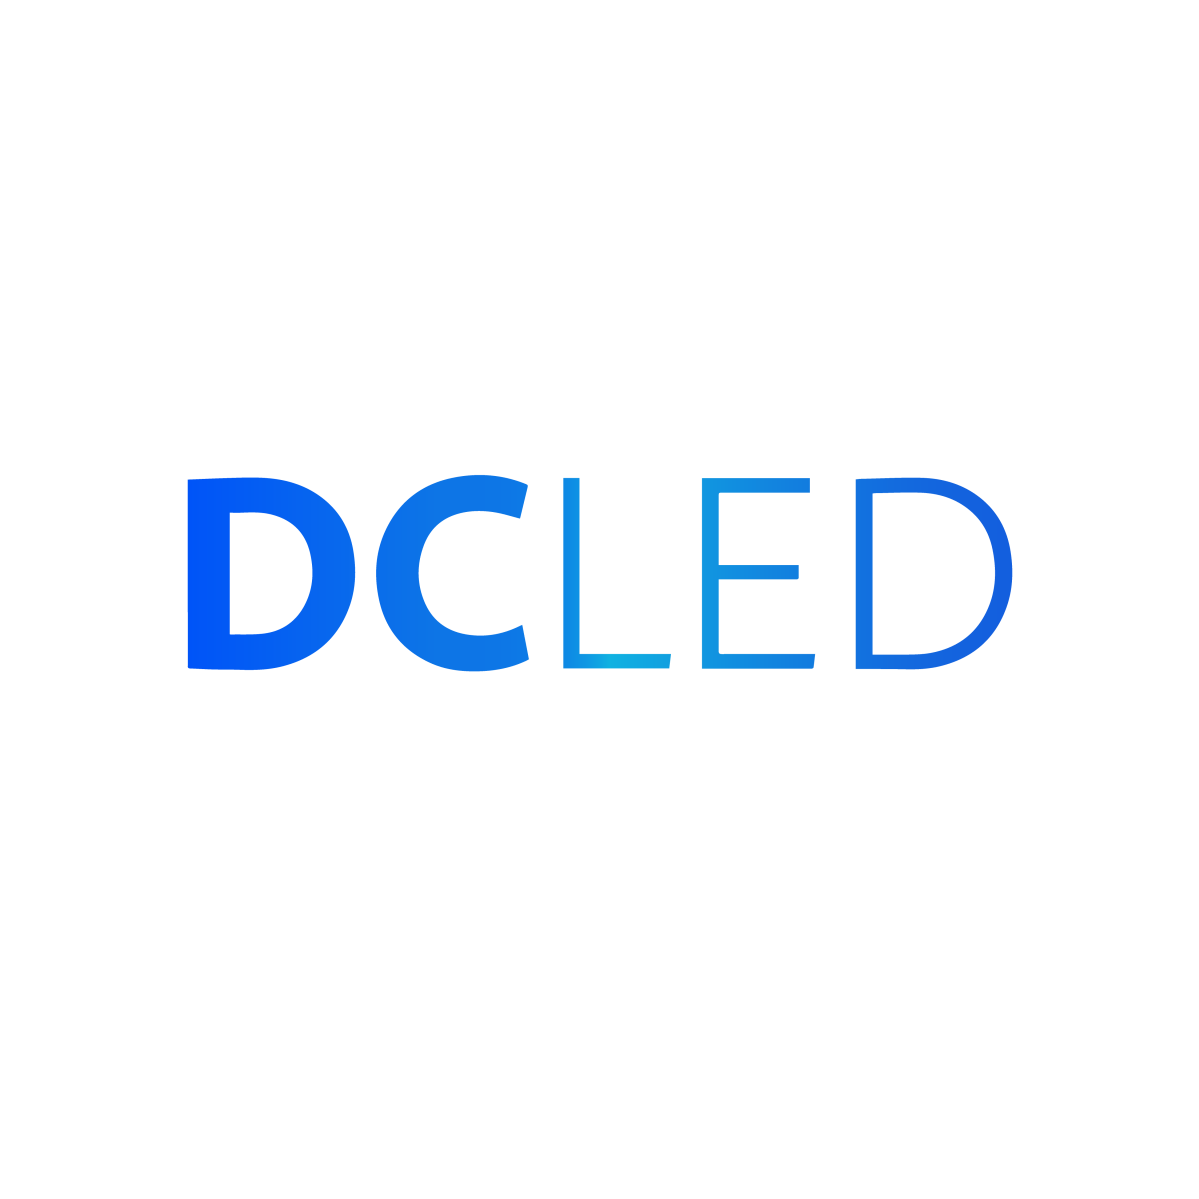 DCLED